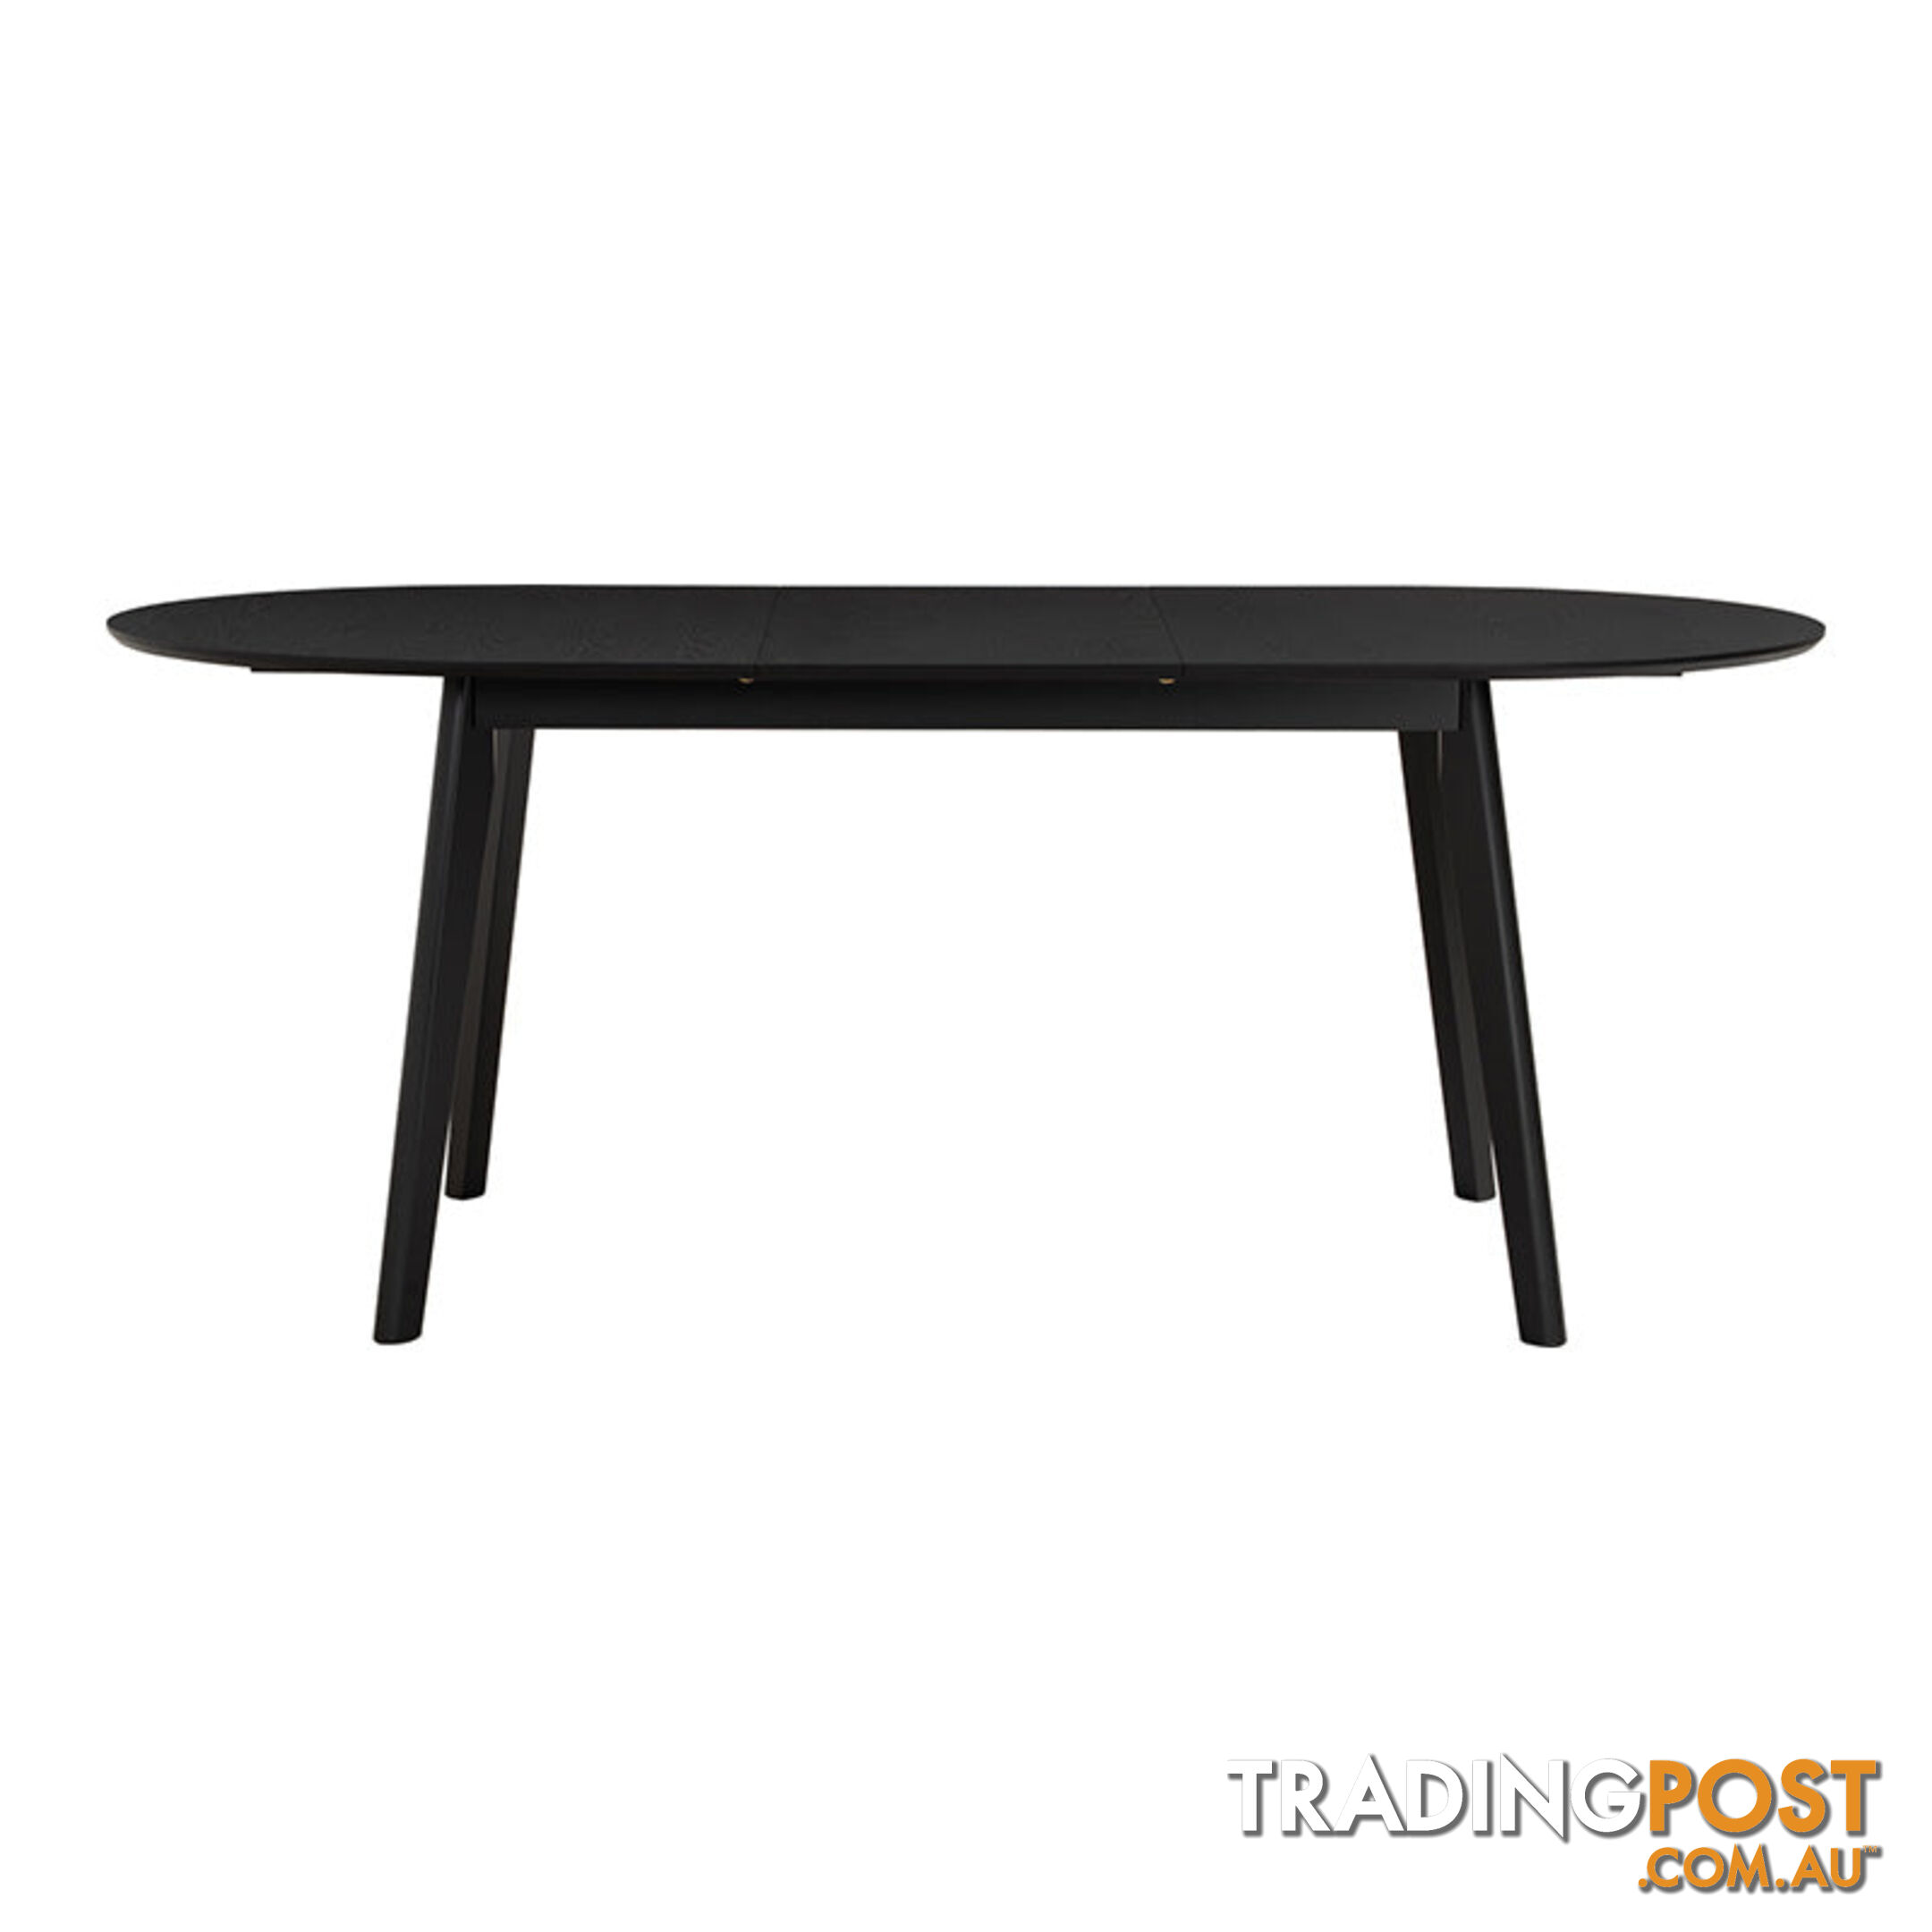 WERNER Extendable Dining Table 150-195cm - Black - 146093 - 9334719012223